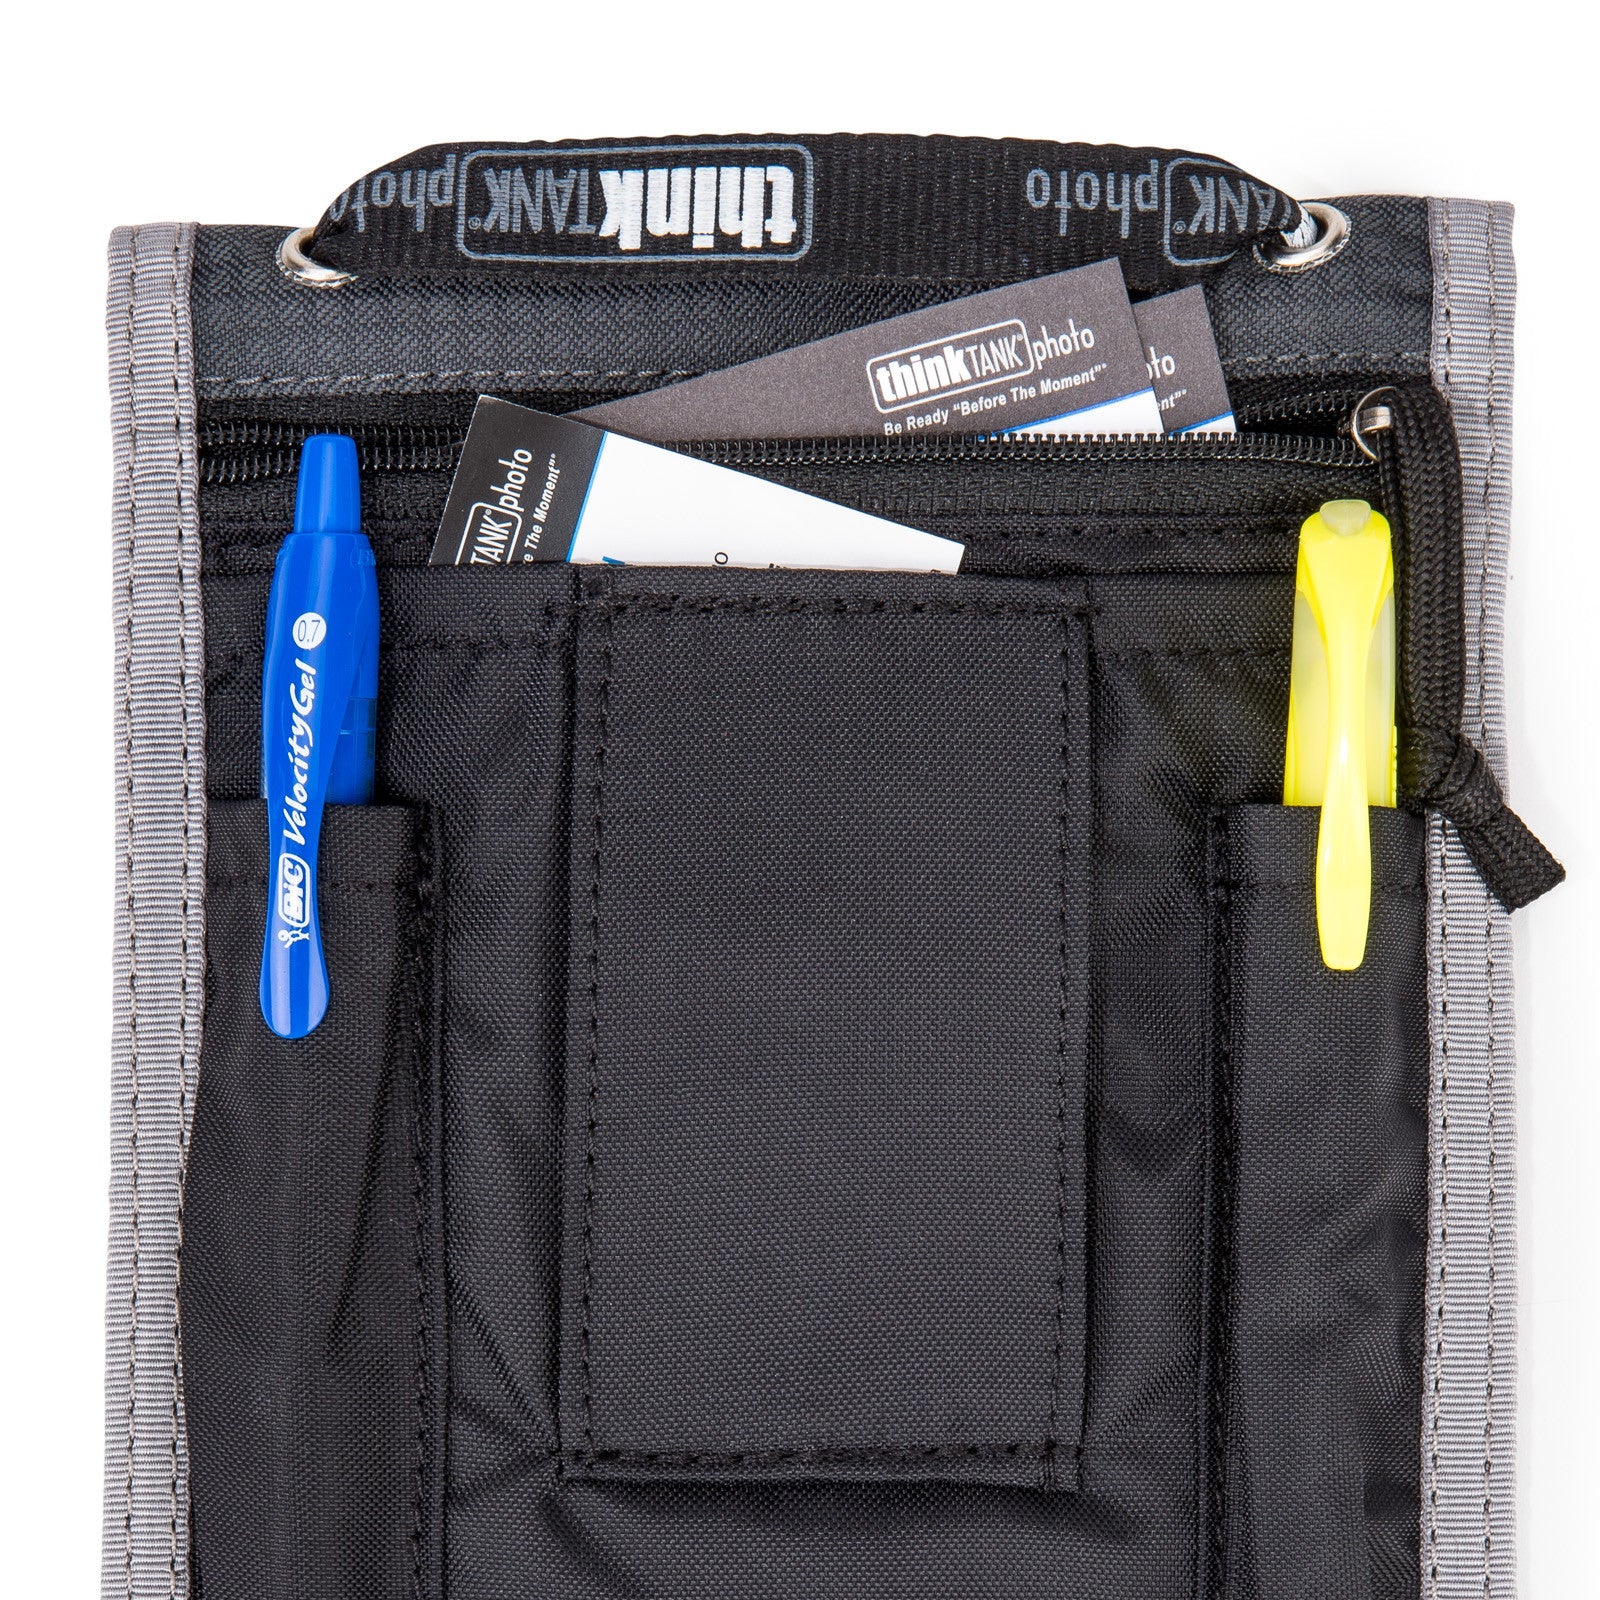 Multiple pockets and pen slots